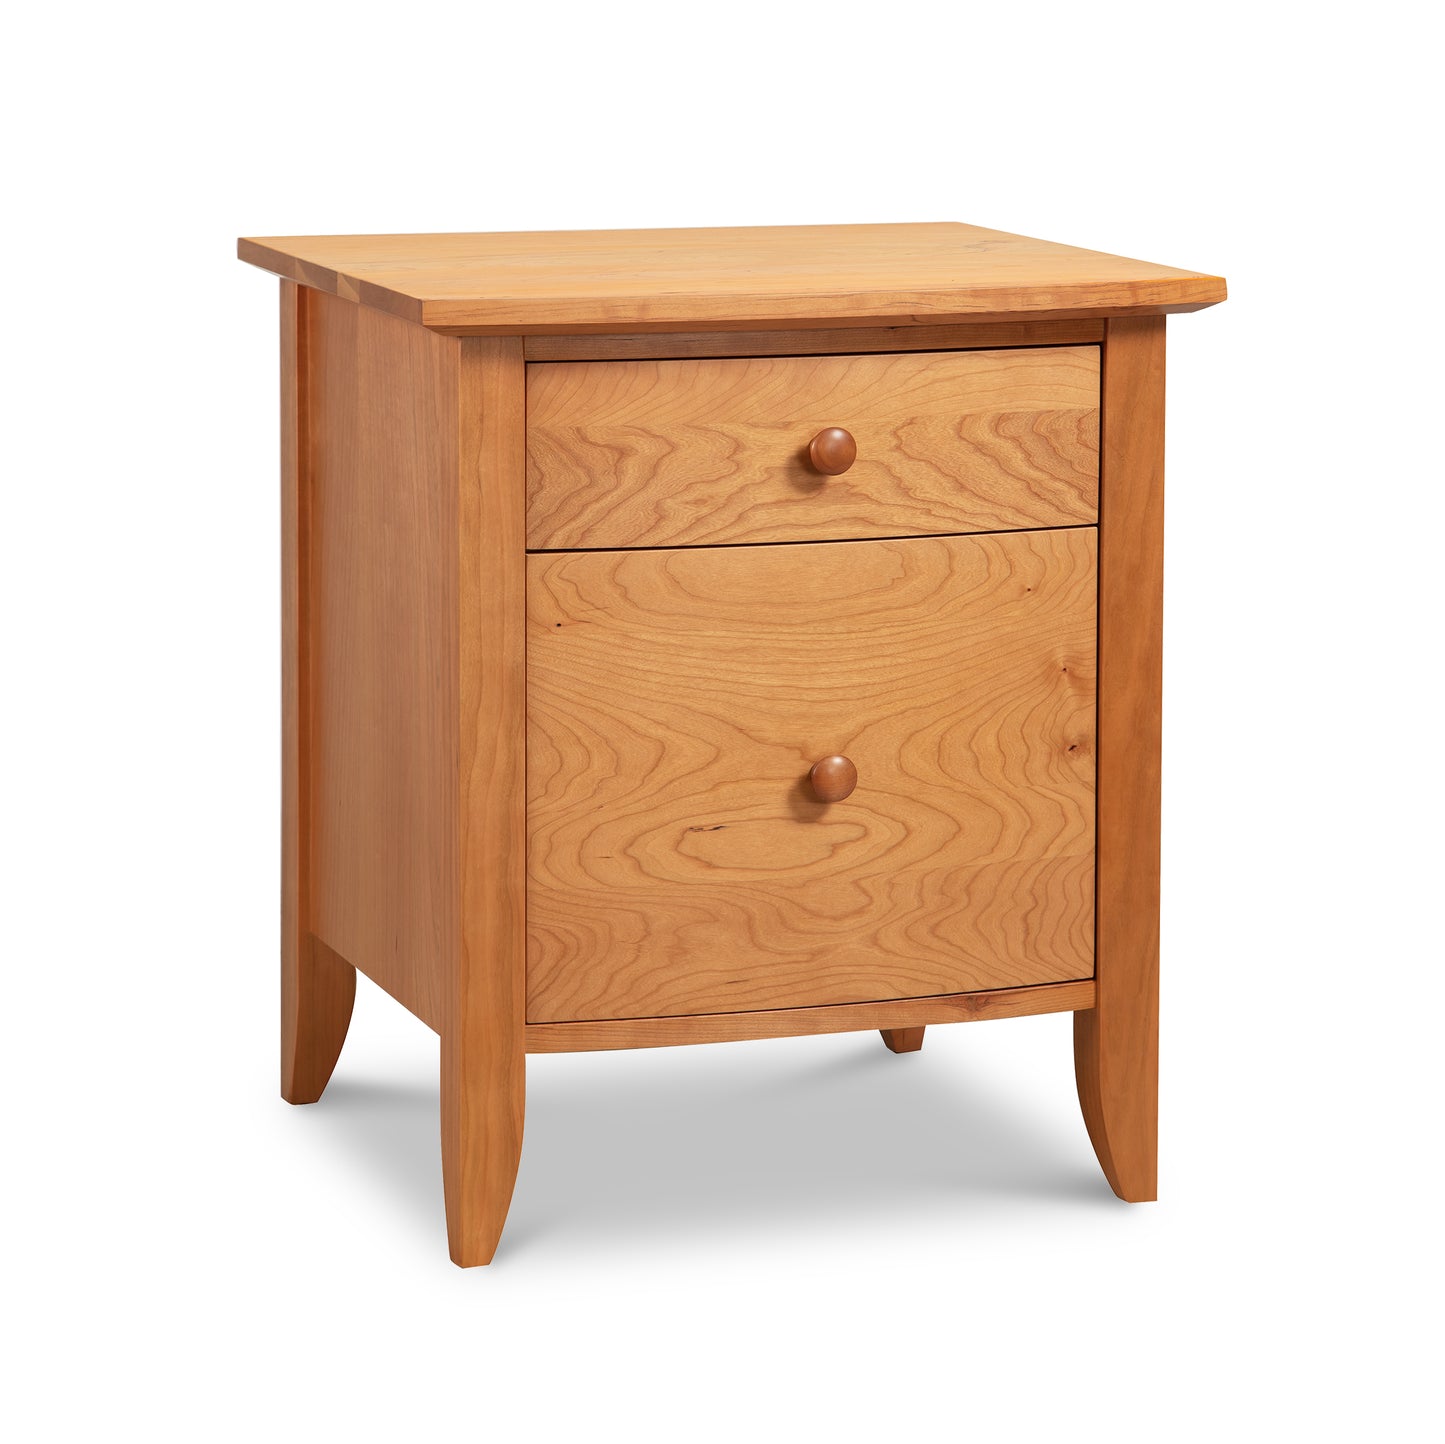 This Bow Front 1-Drawer Nightstand with Door from Lyndon Furniture features a bow front design and two spacious drawers.